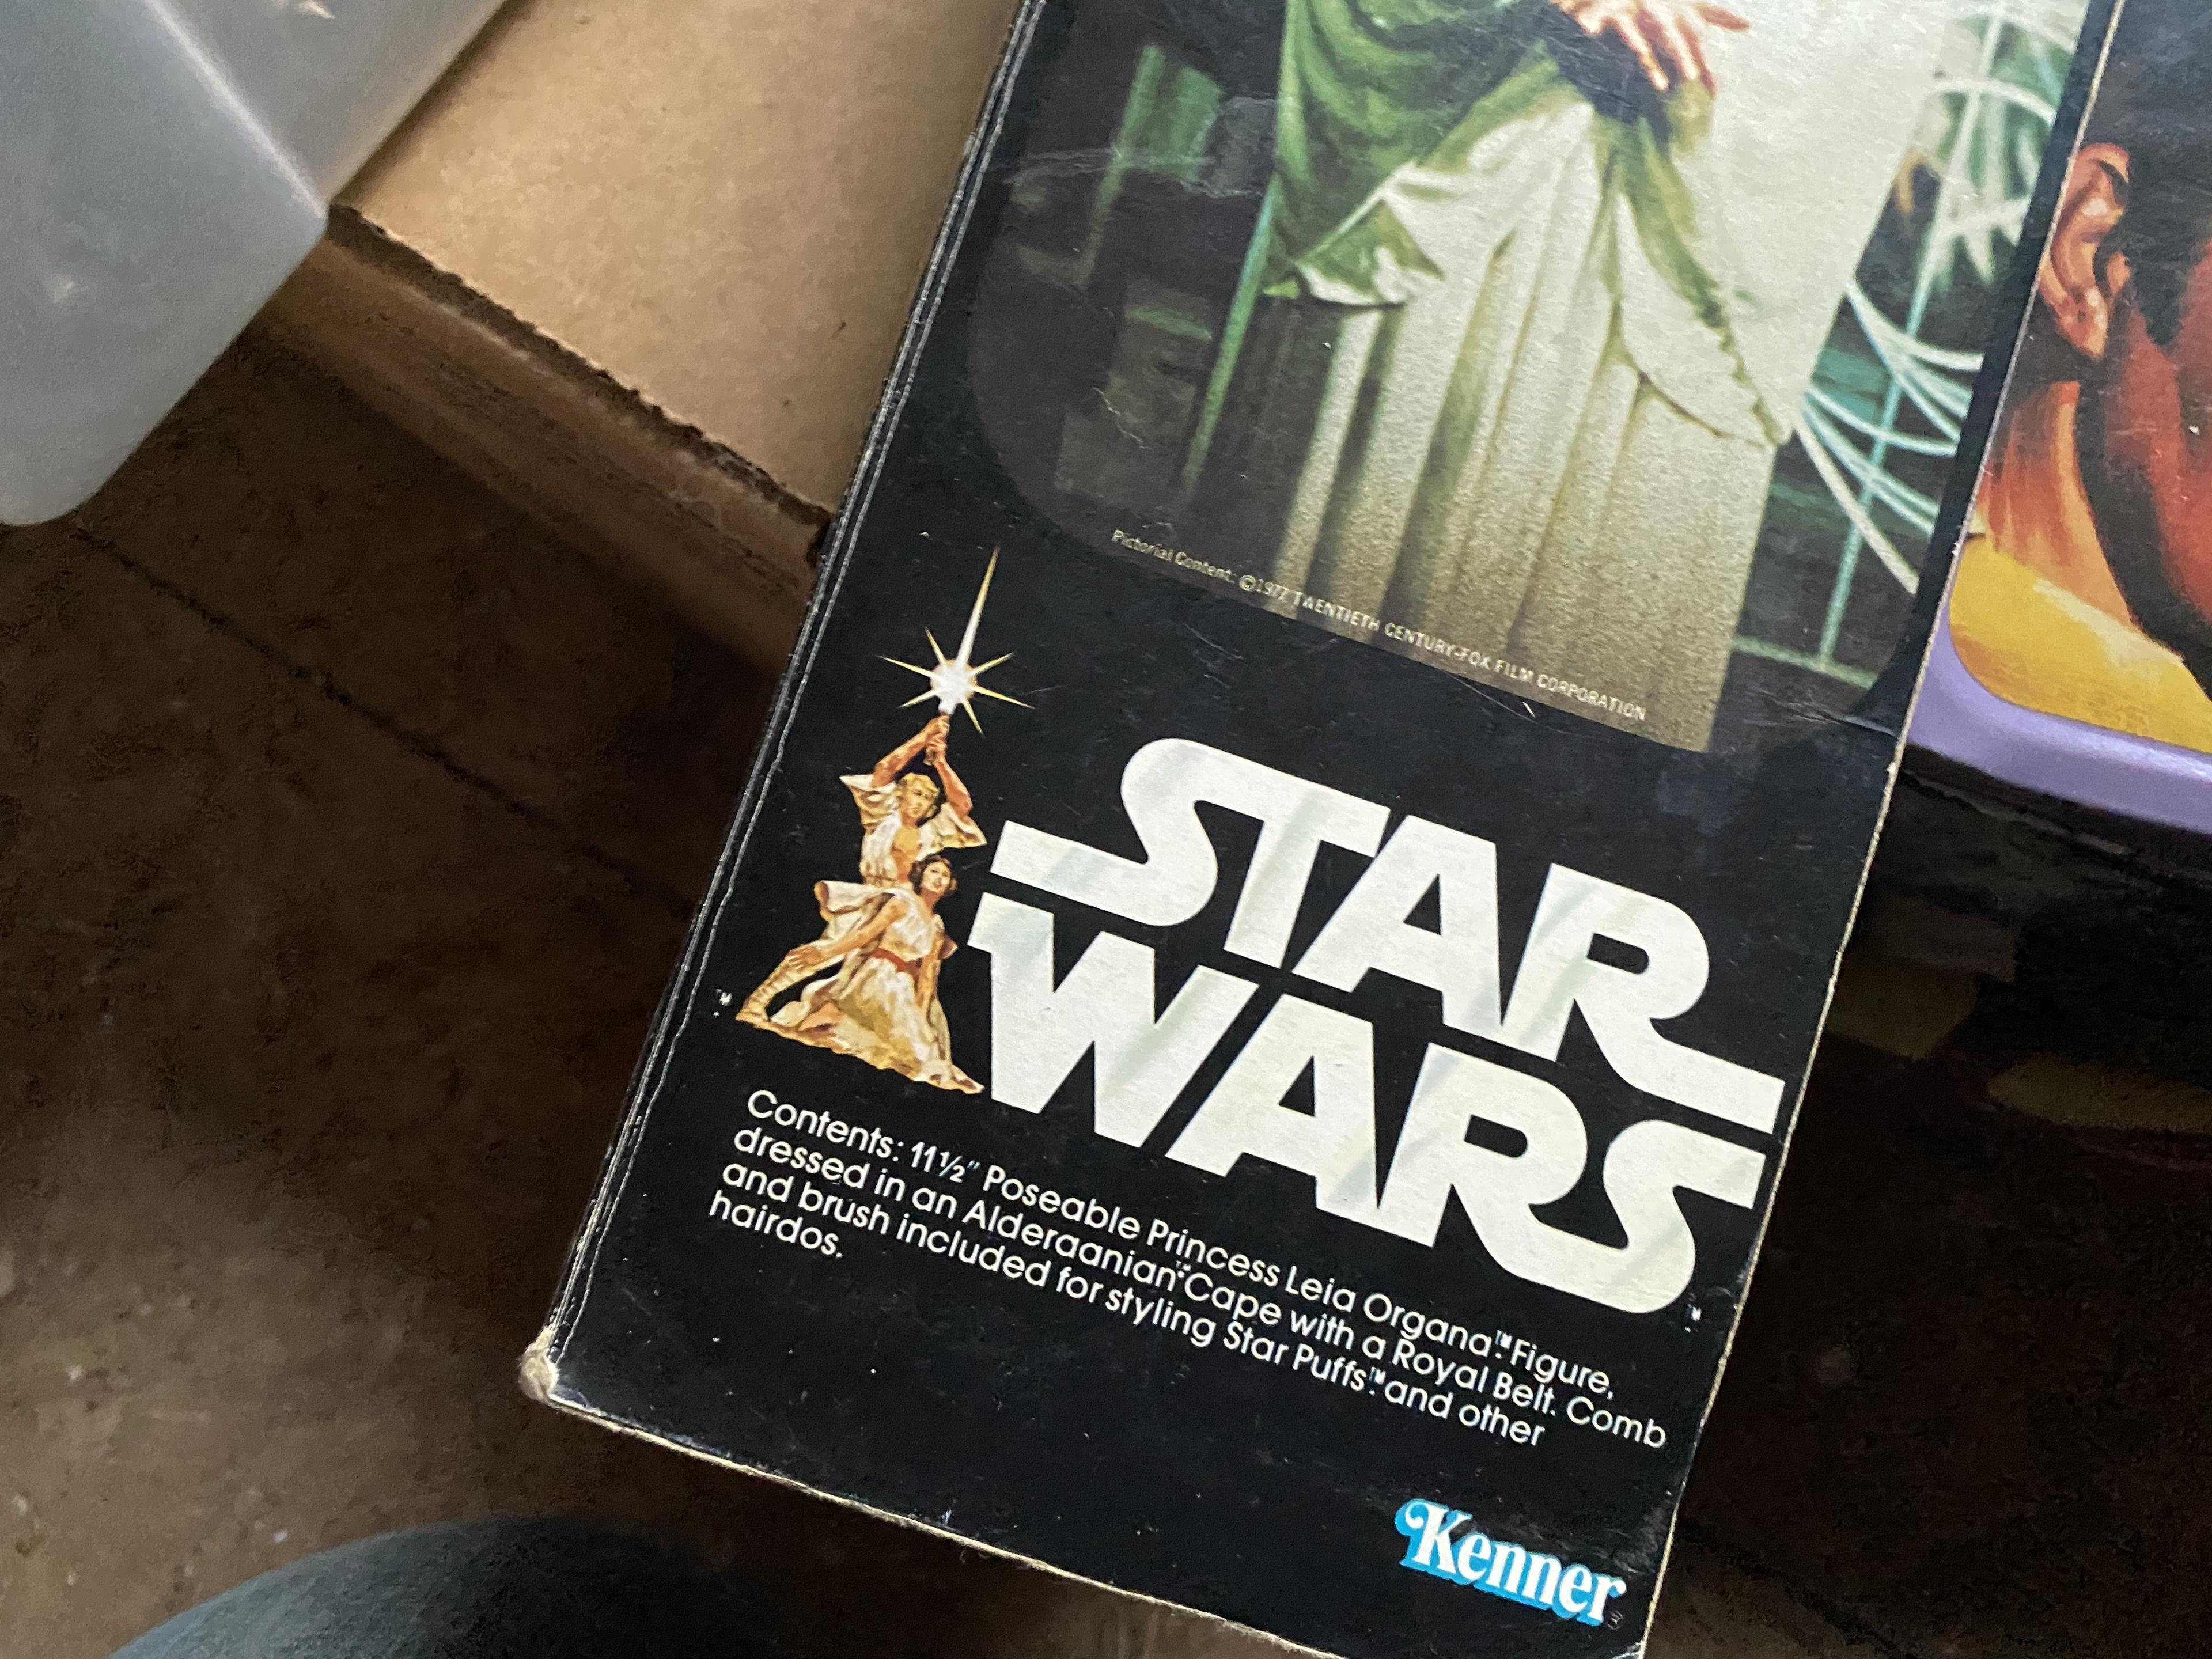 Star Wars toys including in box + Lunch boxes, Urkel